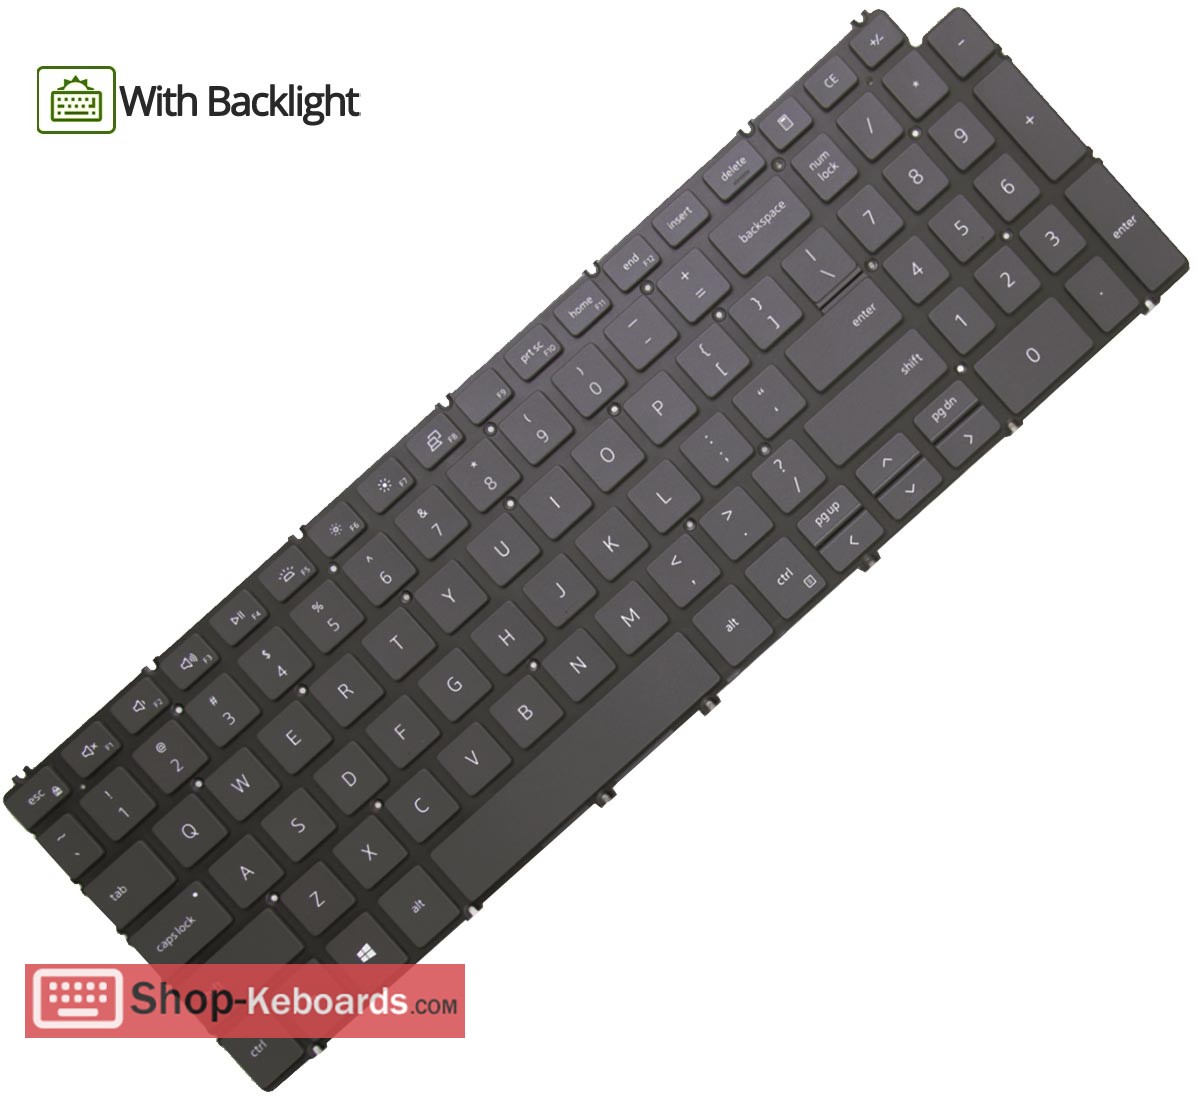 Dell INSPIRON 15 5518 Keyboard replacement